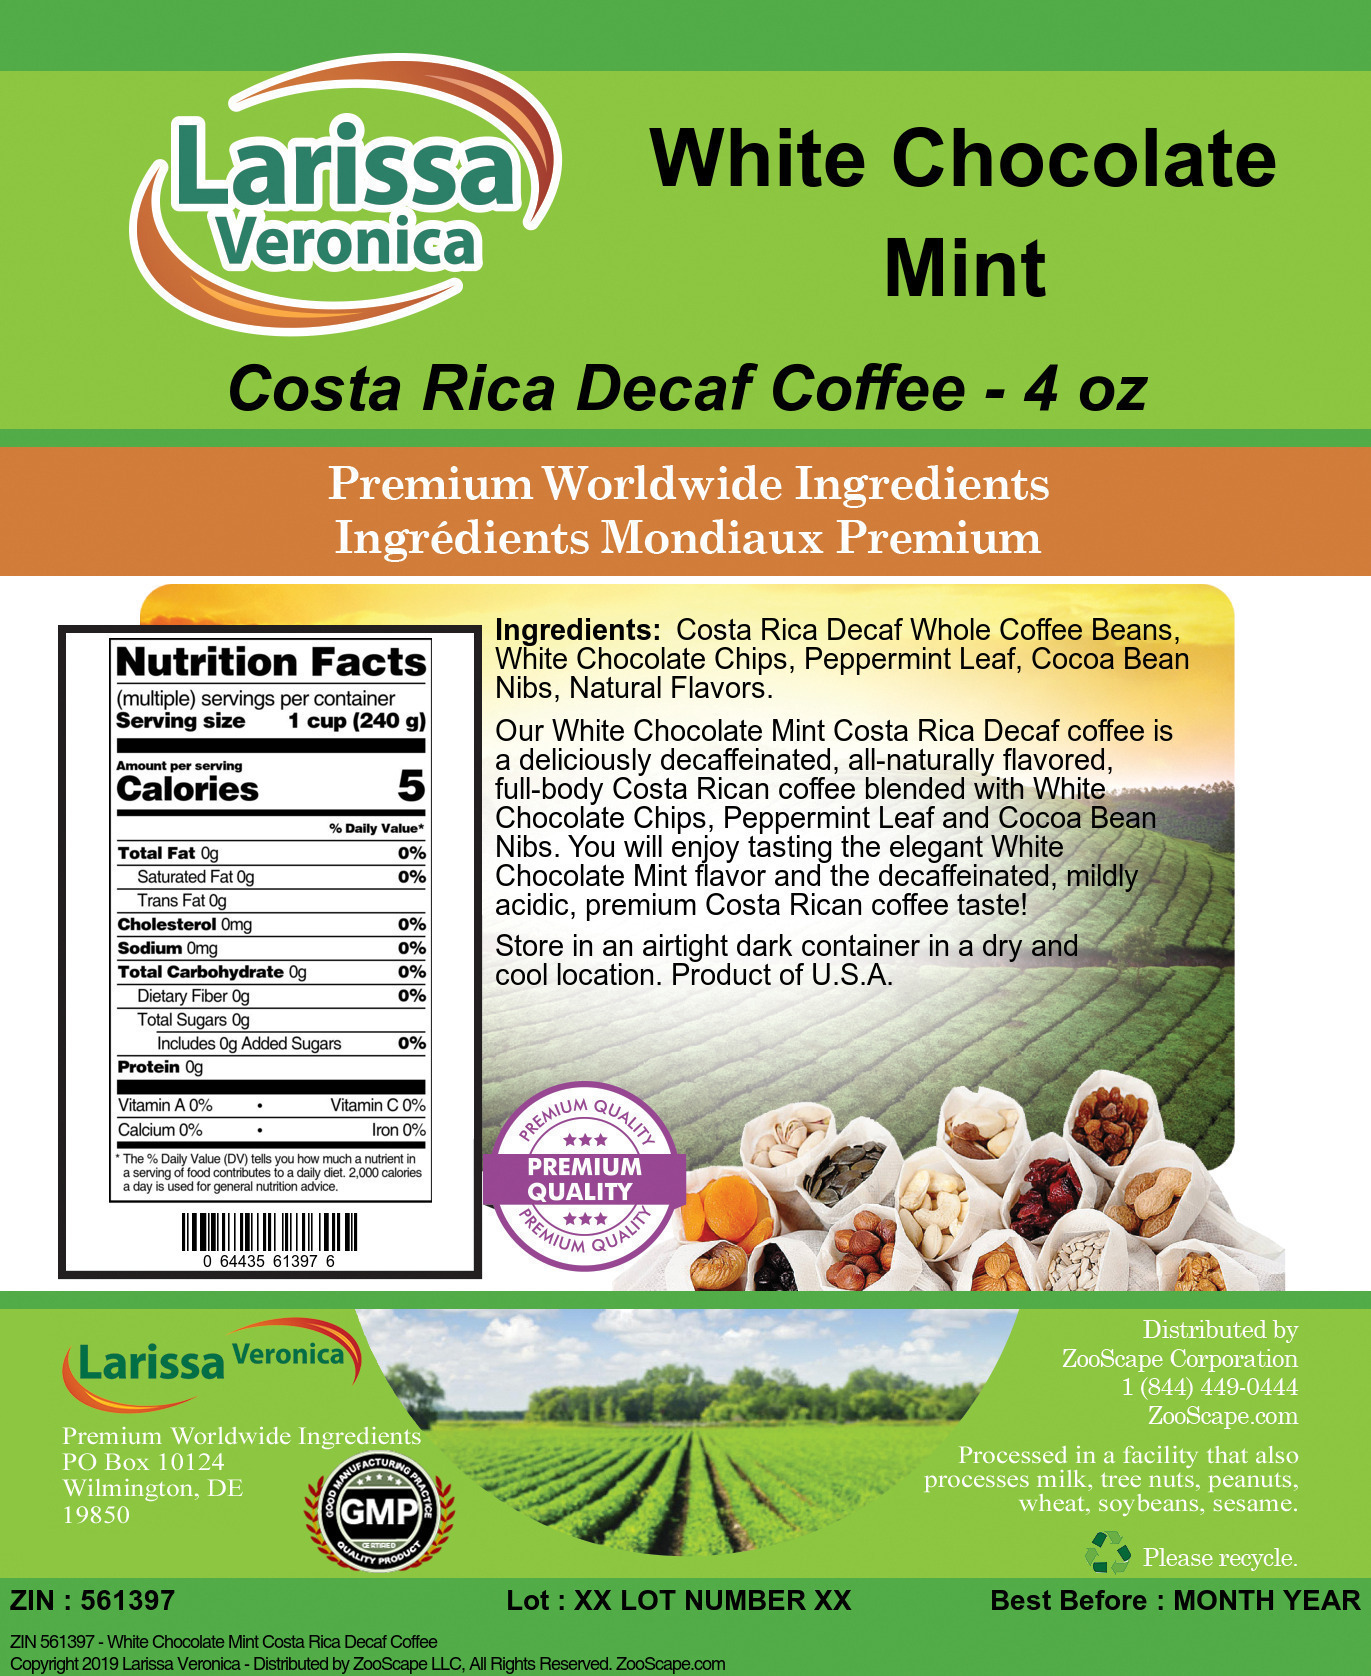 White Chocolate Mint Costa Rica Decaf Coffee - Label